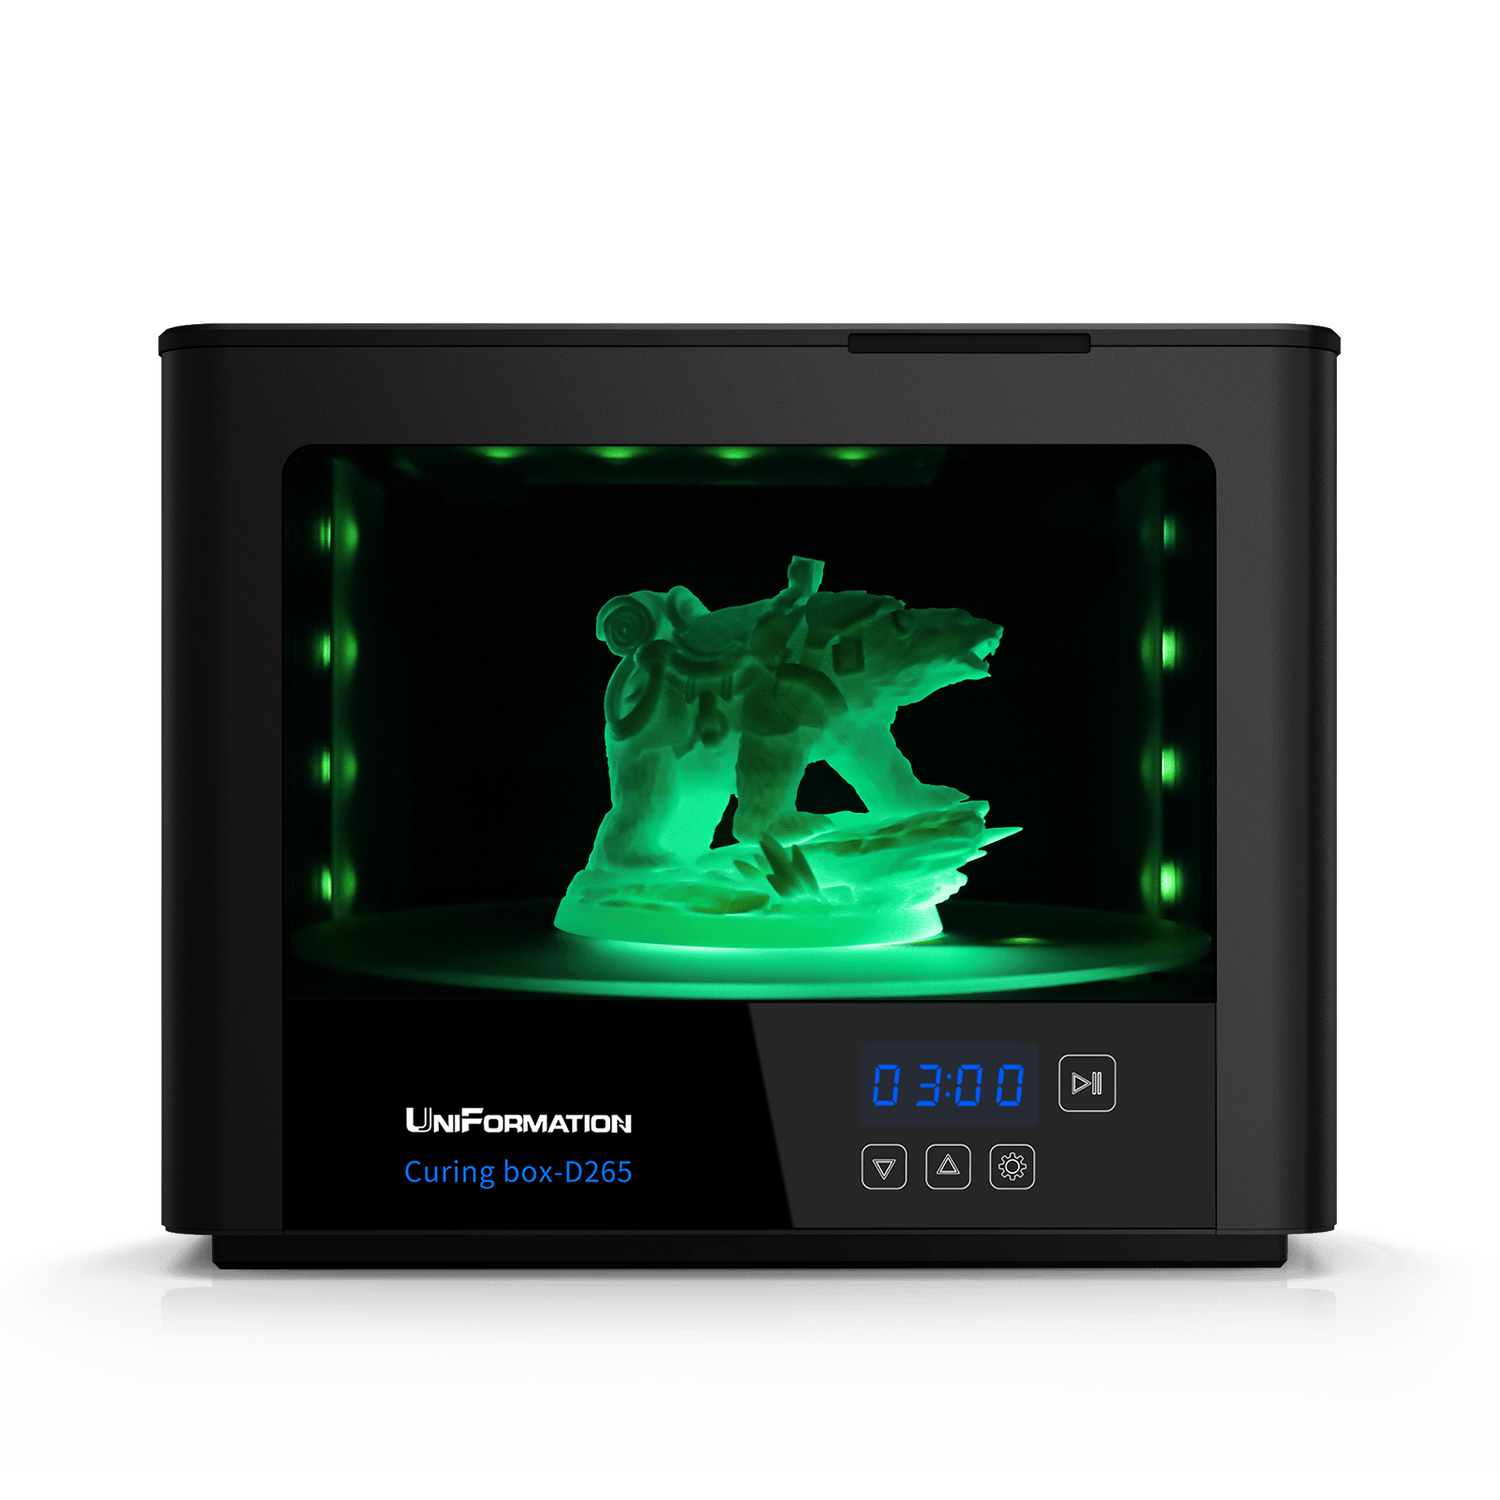 UniFormation D265 UV Curing Station - Yes, That's 3D Printed